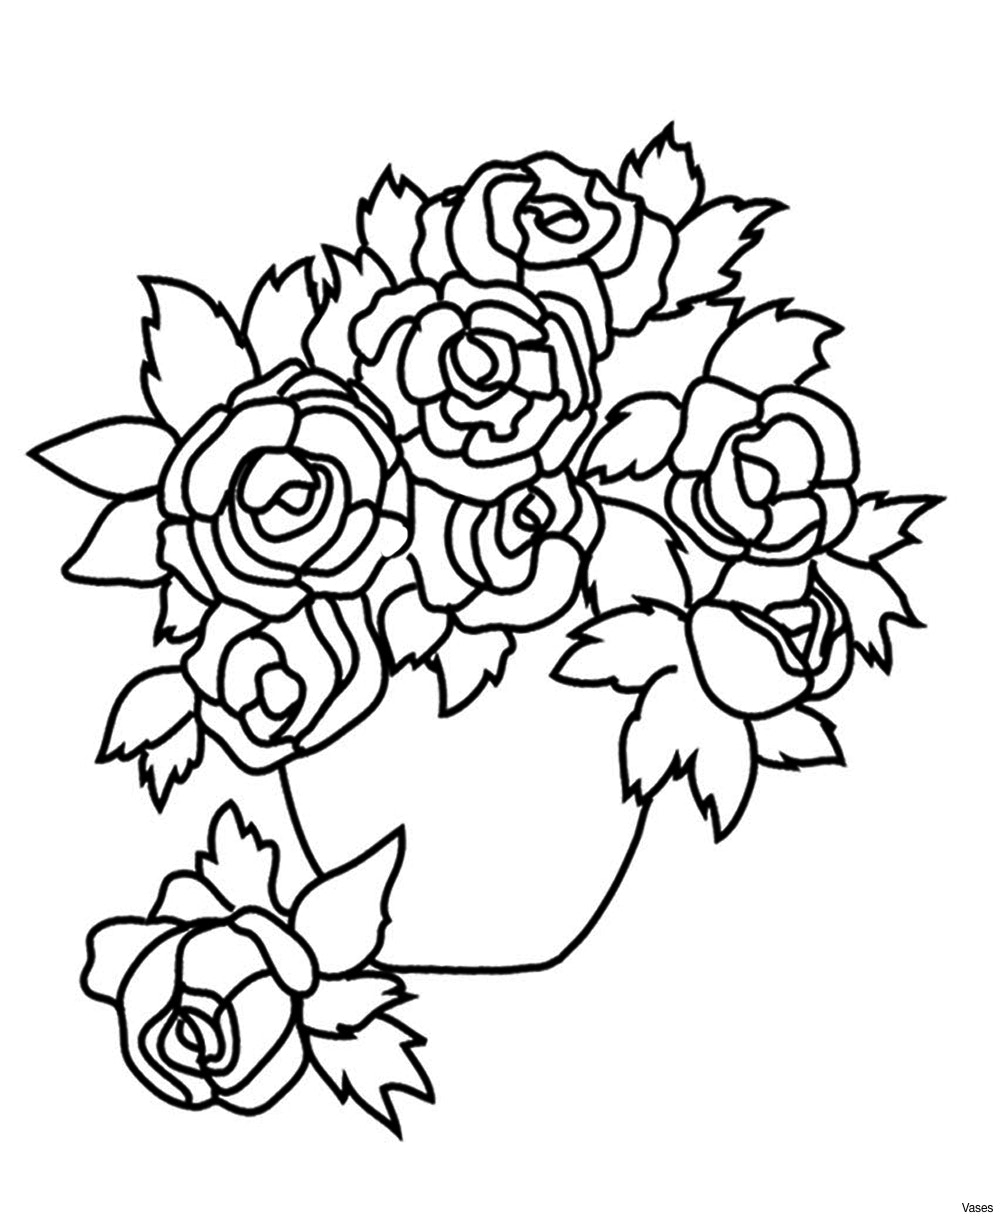 Violet Flower Coloring Page at GetColorings.com | Free printable